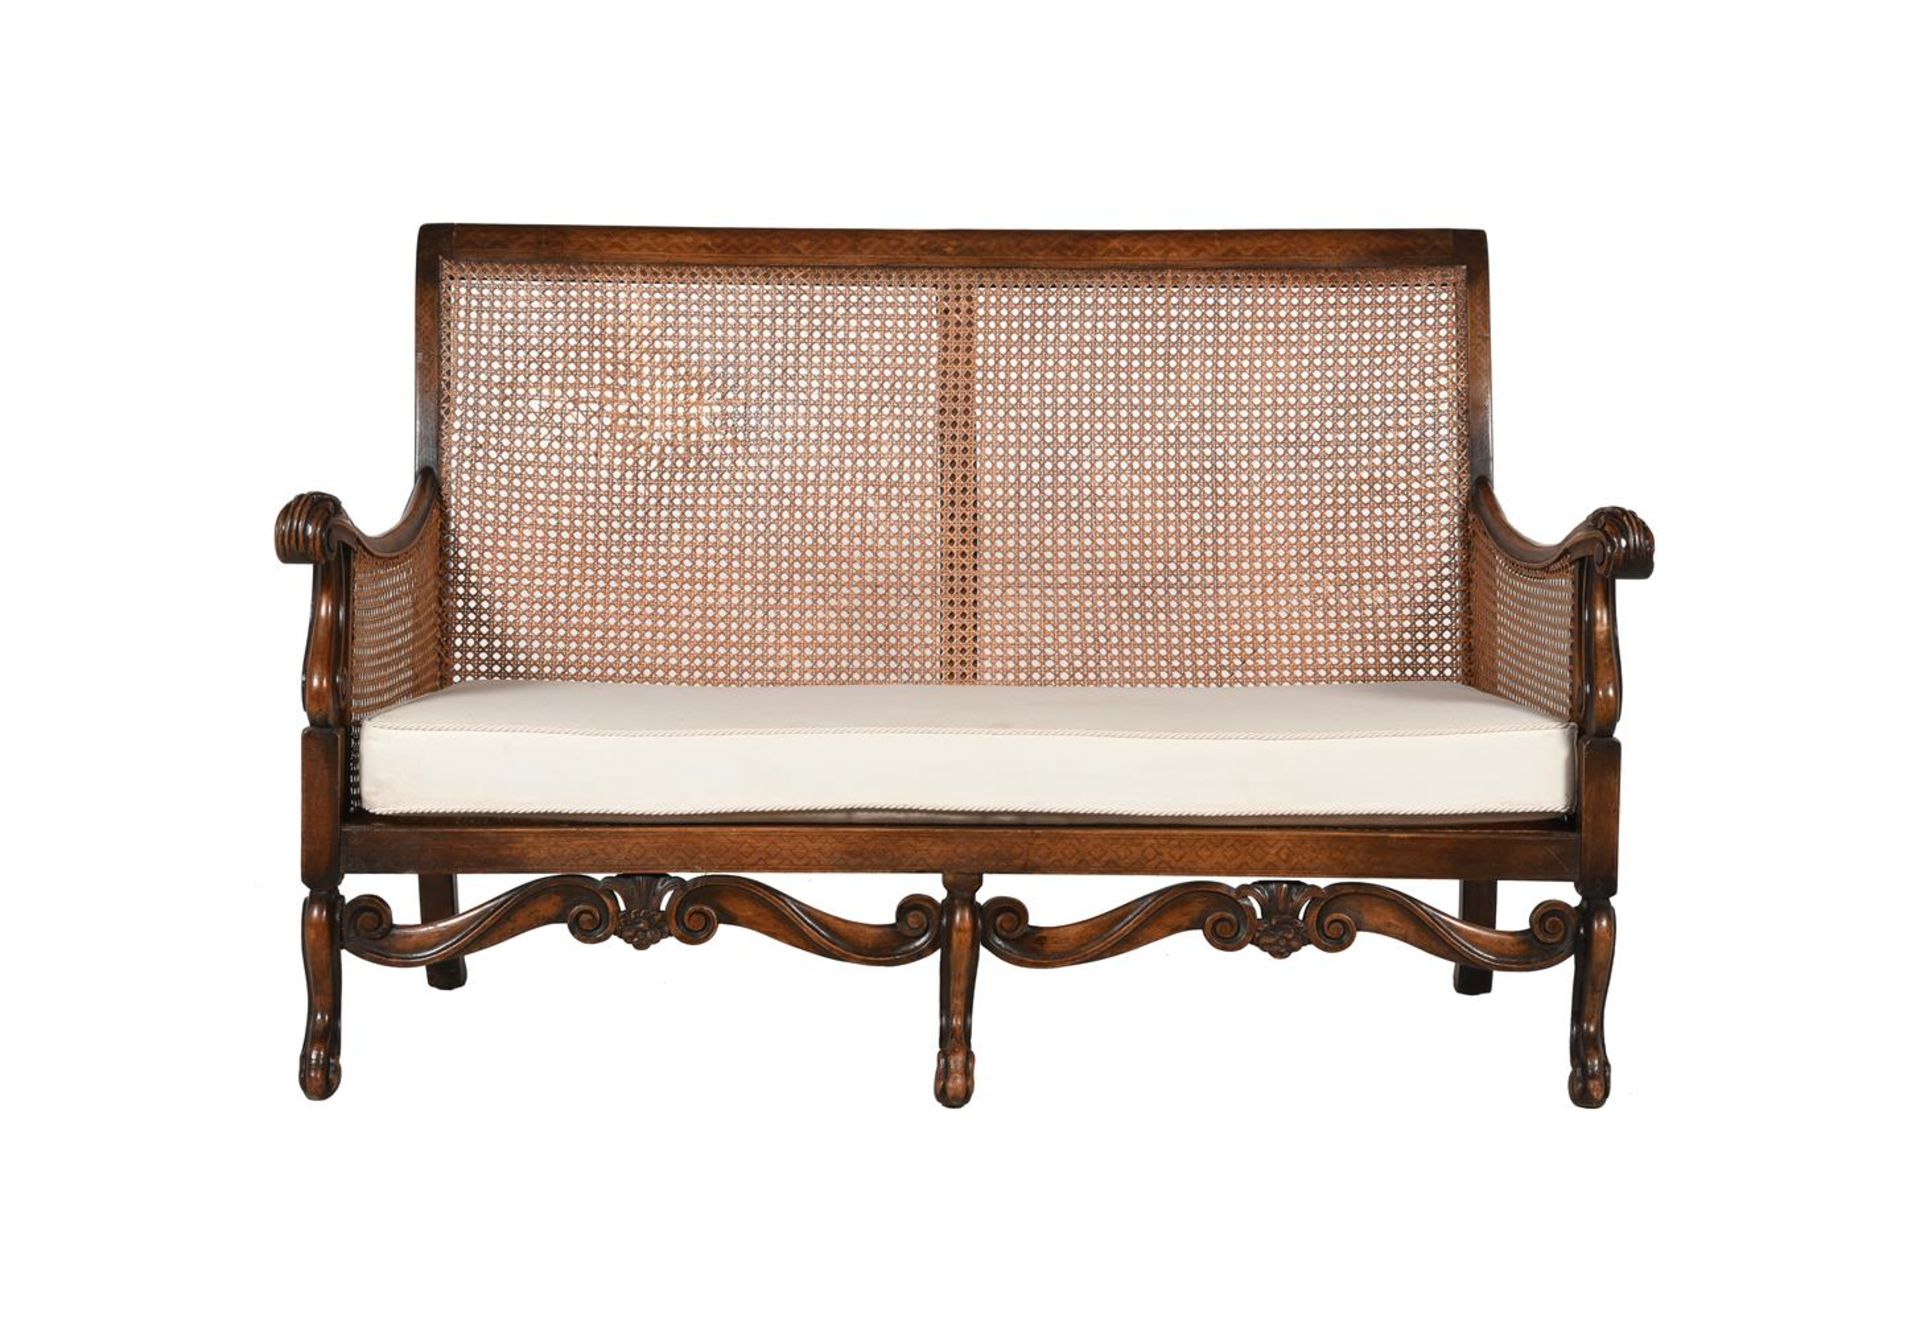 A CARVED BEECH BERGERE SETTEE IN LATE 17TH CENTURY STYLE - Image 2 of 8